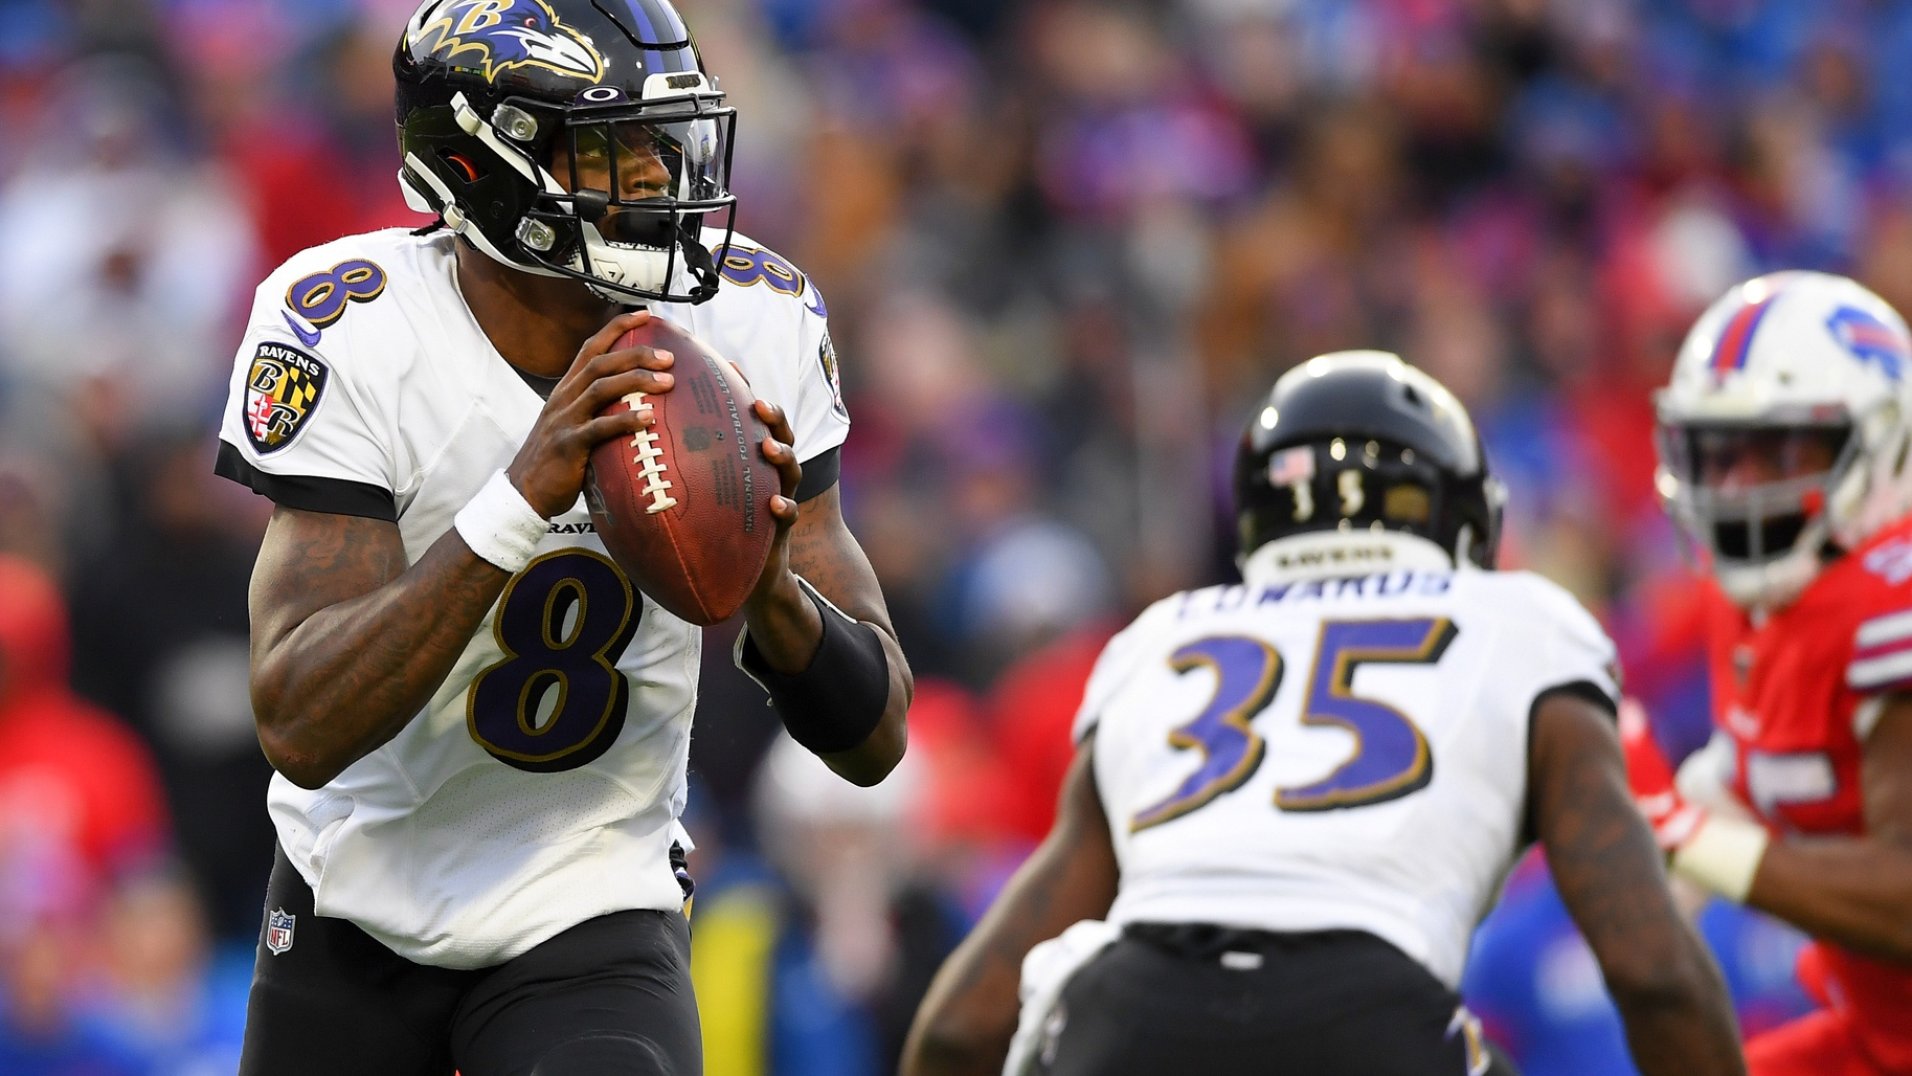 Lamar Jackson reigns supreme in our 2020 fantasy football projections